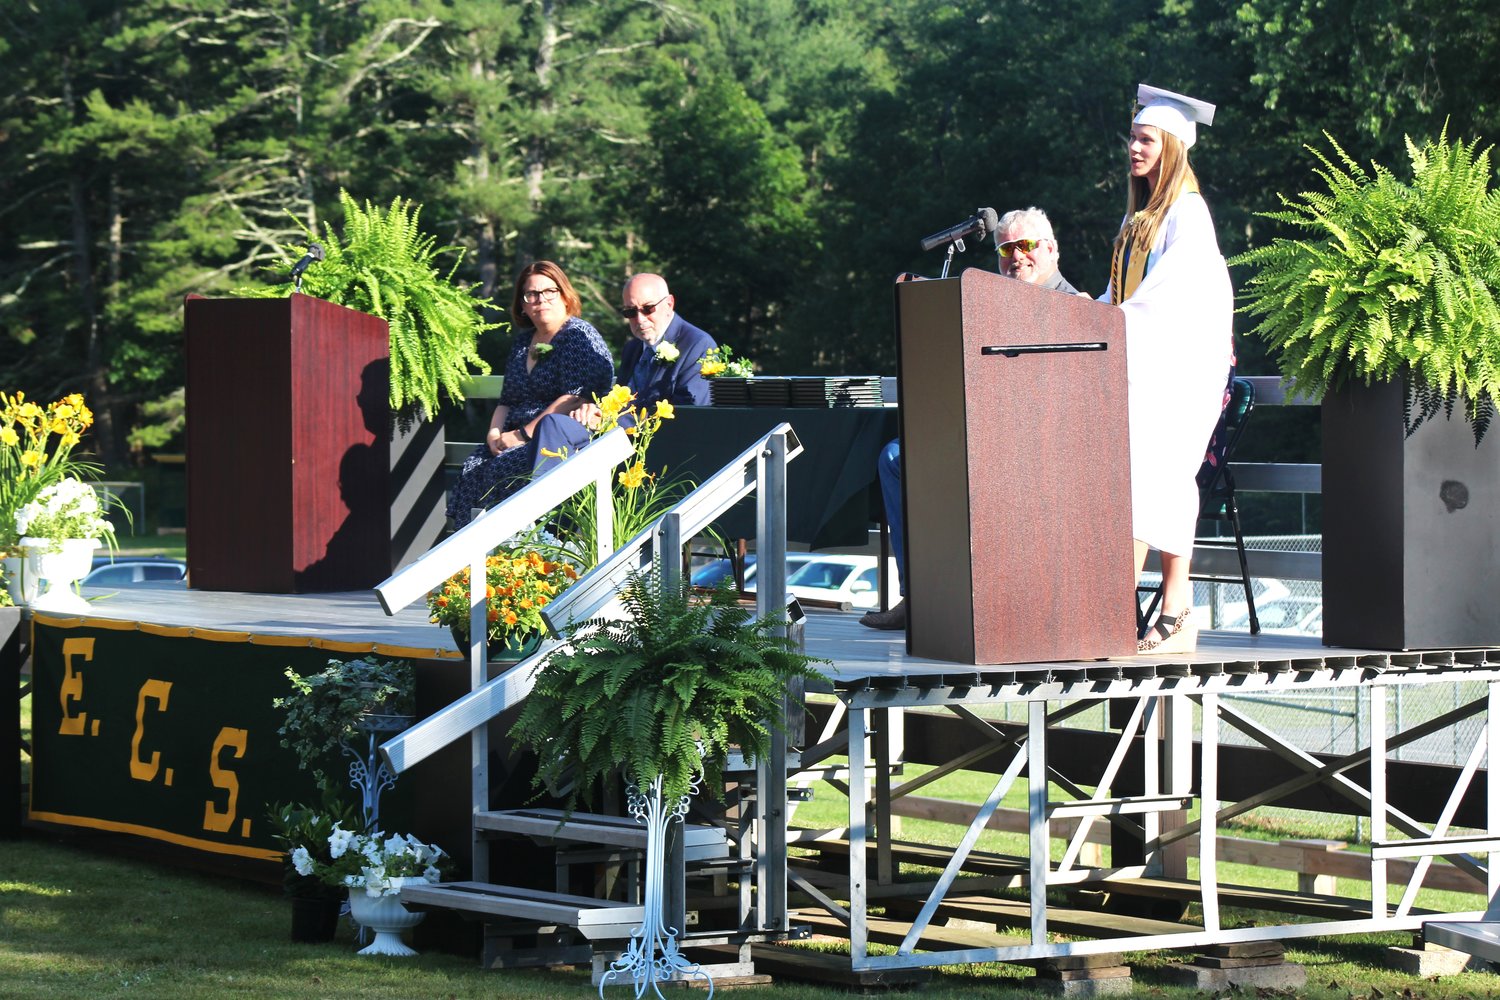 Valedictorian Kaitlyn Potter spoke of the benefits of being part of a small graduating class. Looking on are principal Tracy Ferreira, superintendent John Morgano, and school board president Scott Hallock.